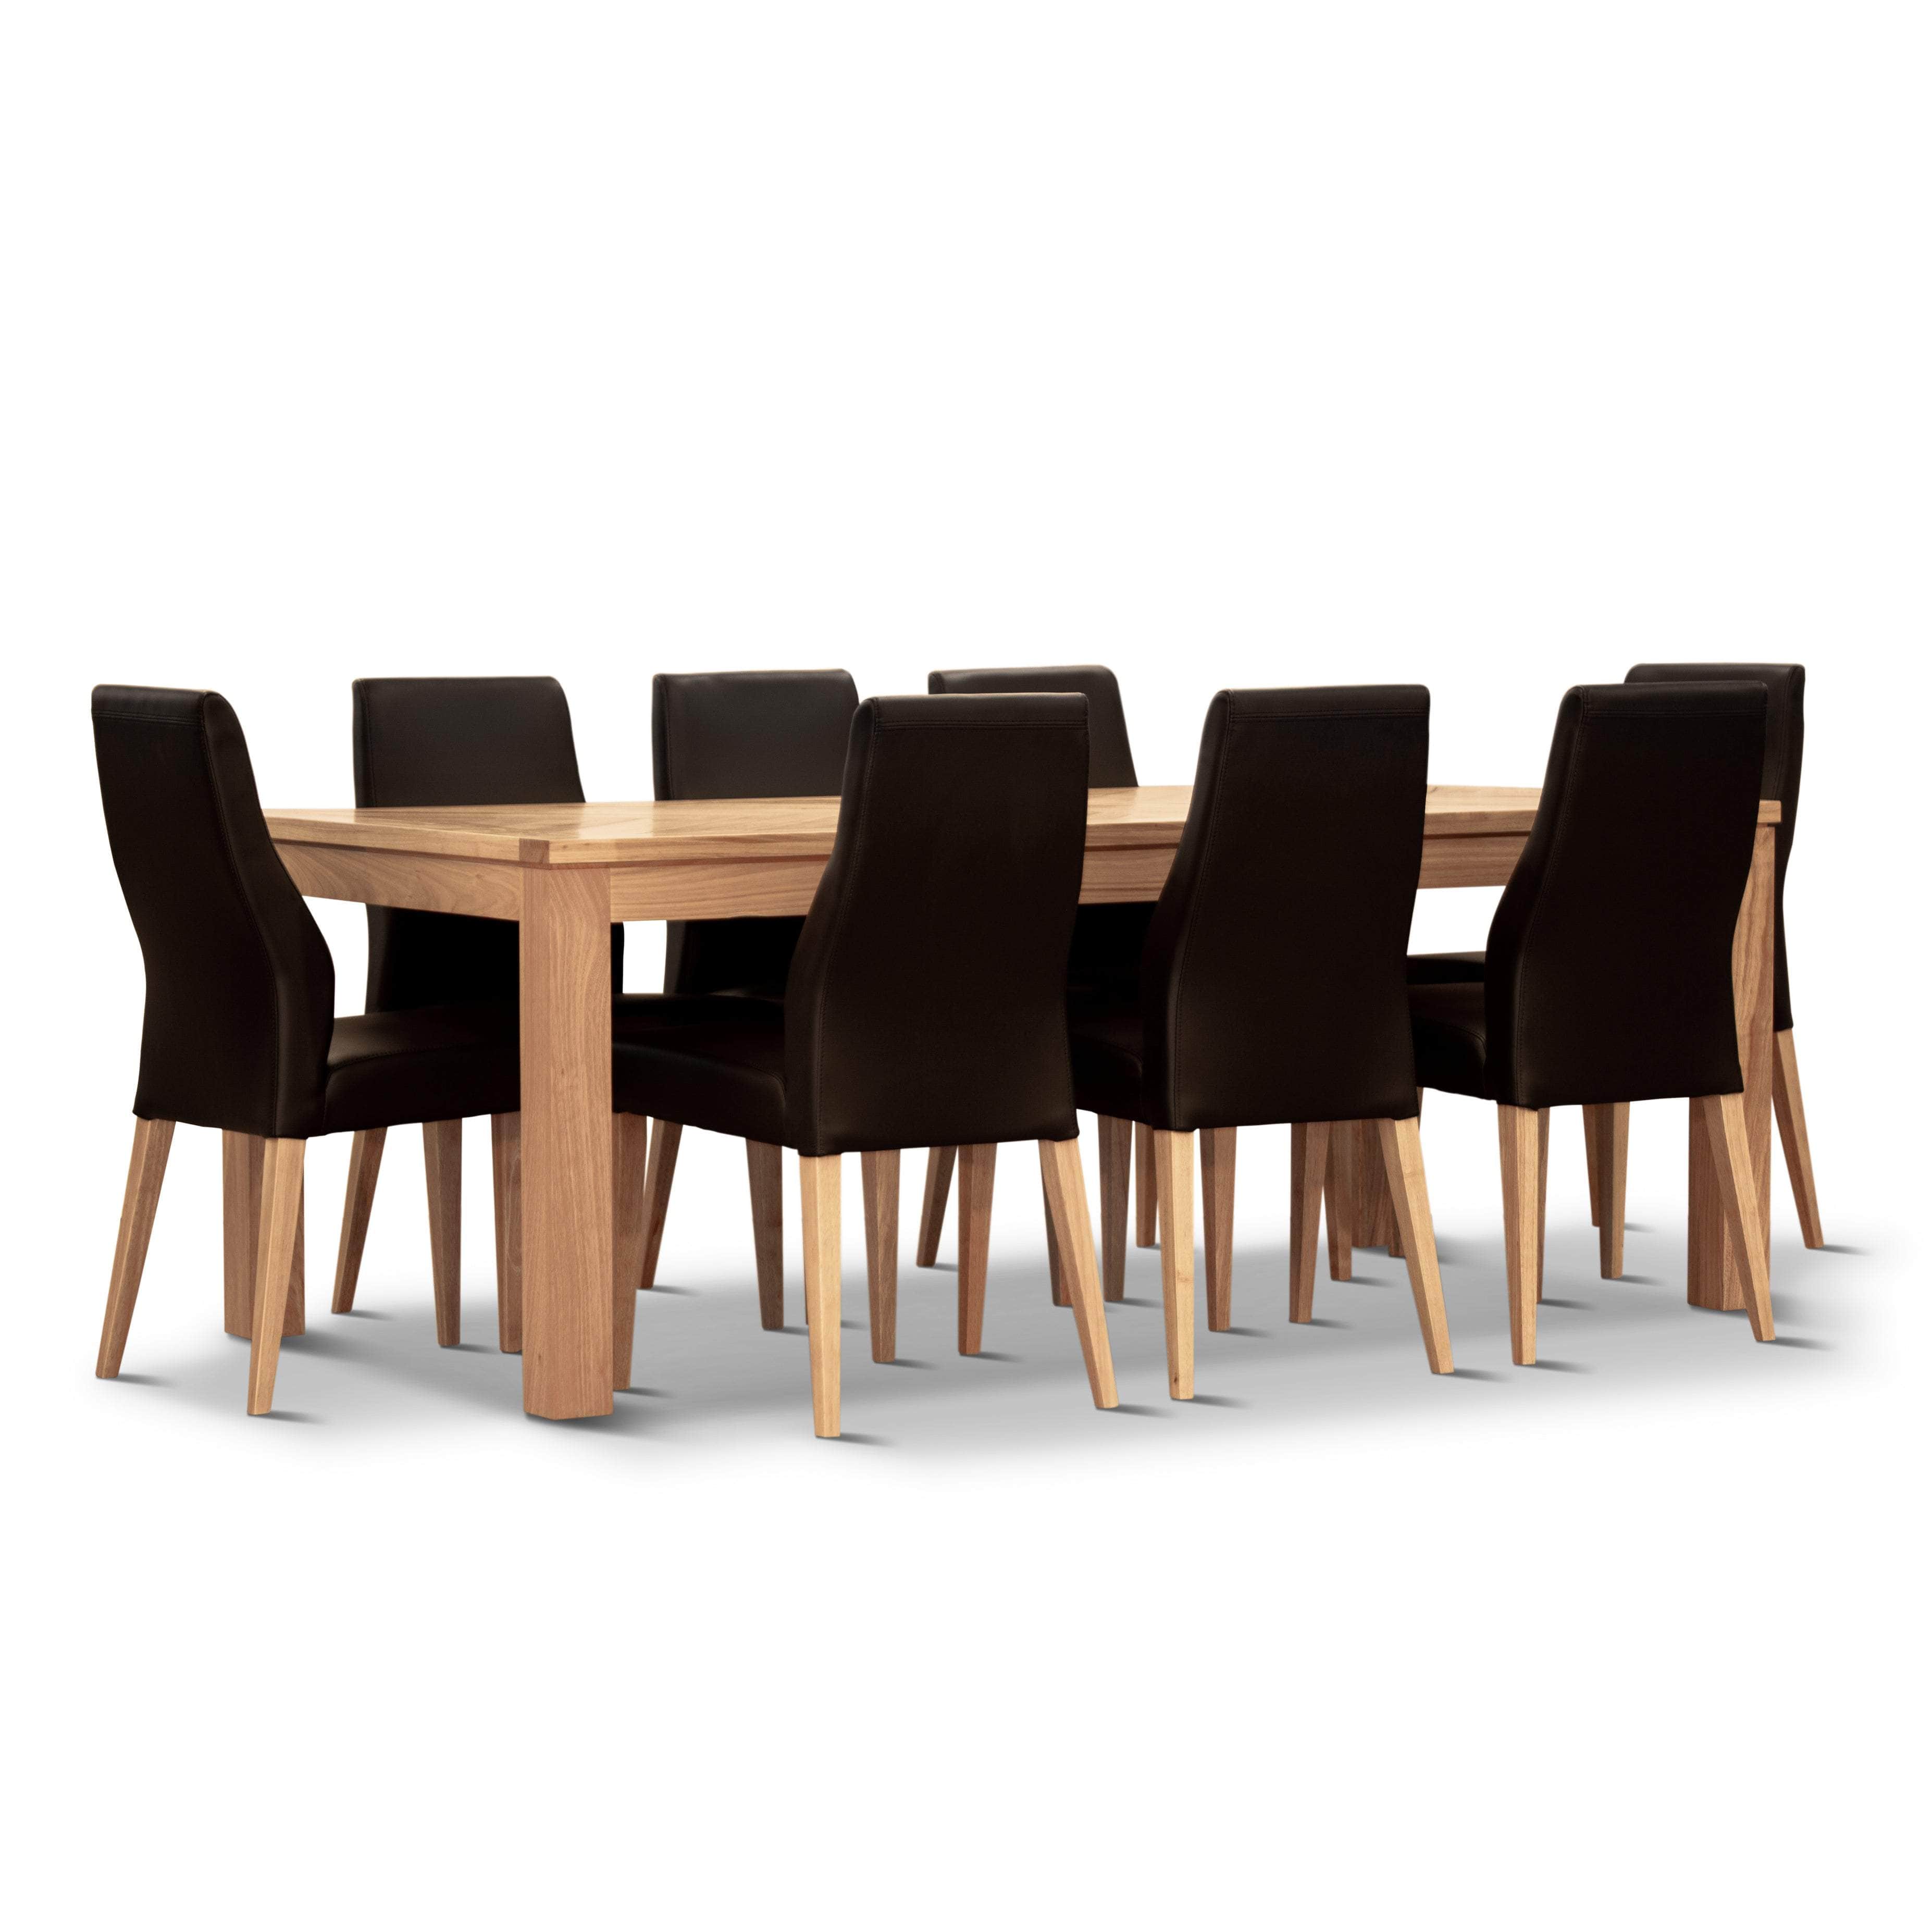 Dining Chair Set Of 4 Pu Leather Seat Solid Messmate Timber - Black